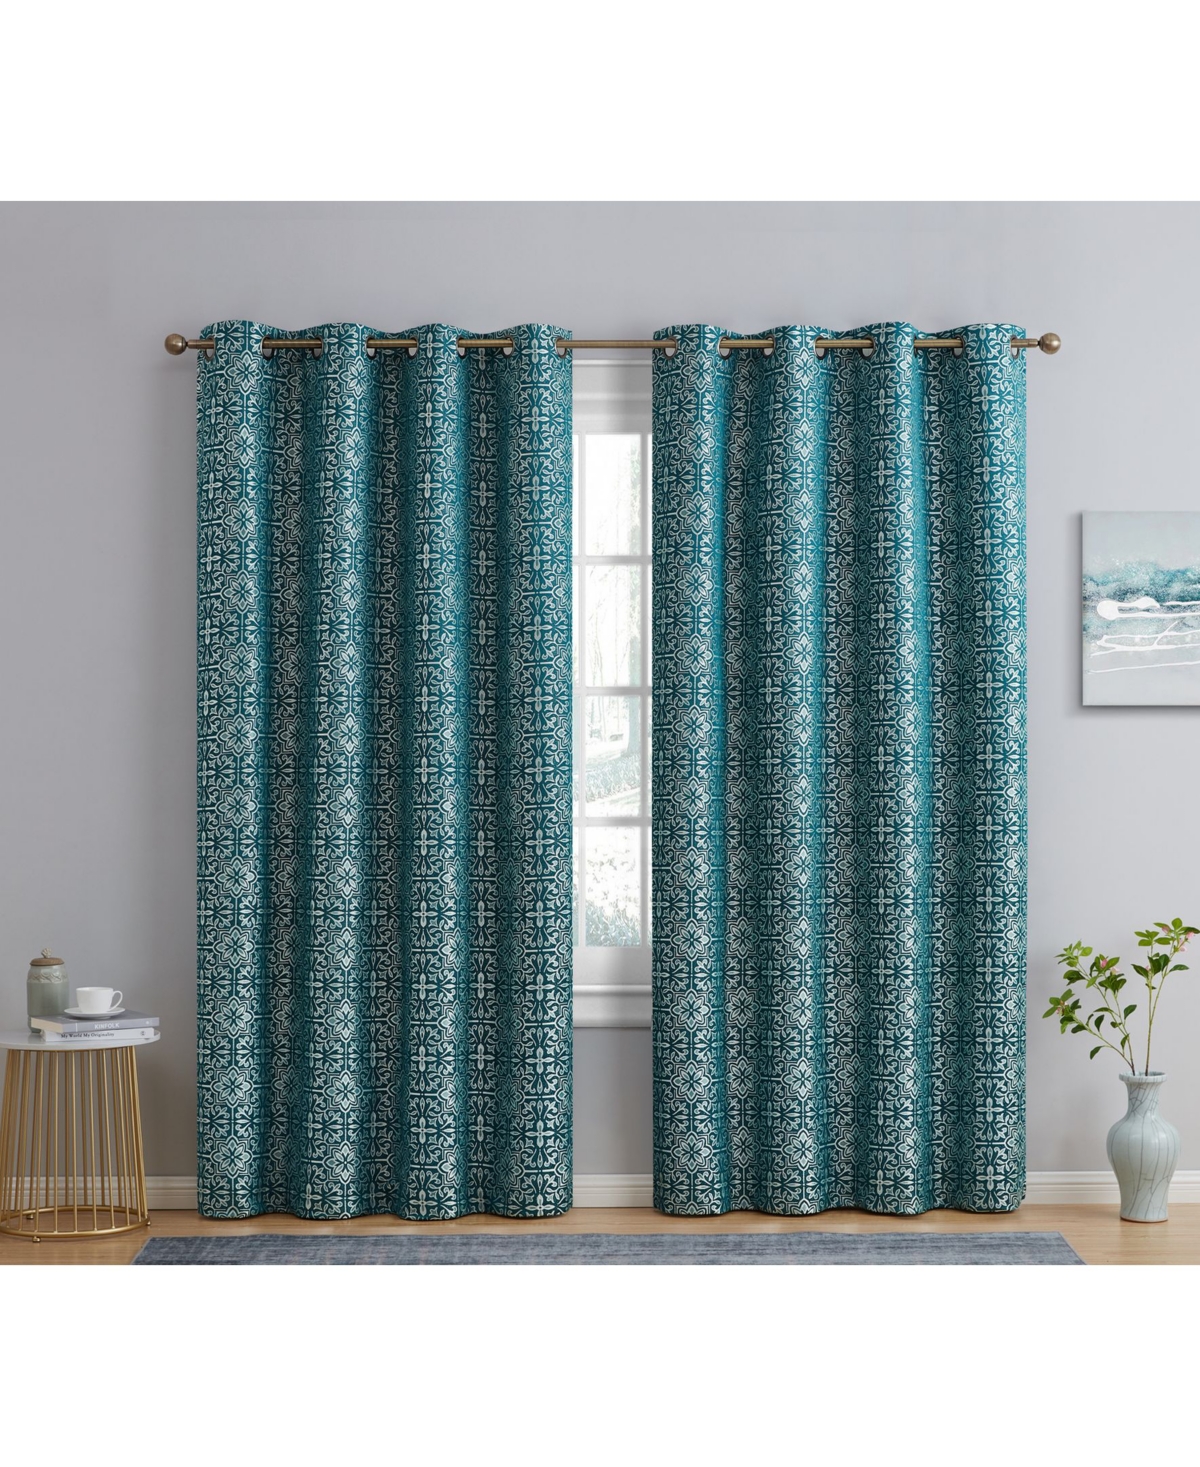 Mia Moroccan Tile 100% Complete Blackout Heavy Thermal Insulated Heat/Cold/Uv Absorbing Grommet Curtain Drapery Panels for Bedroom & Living Roo